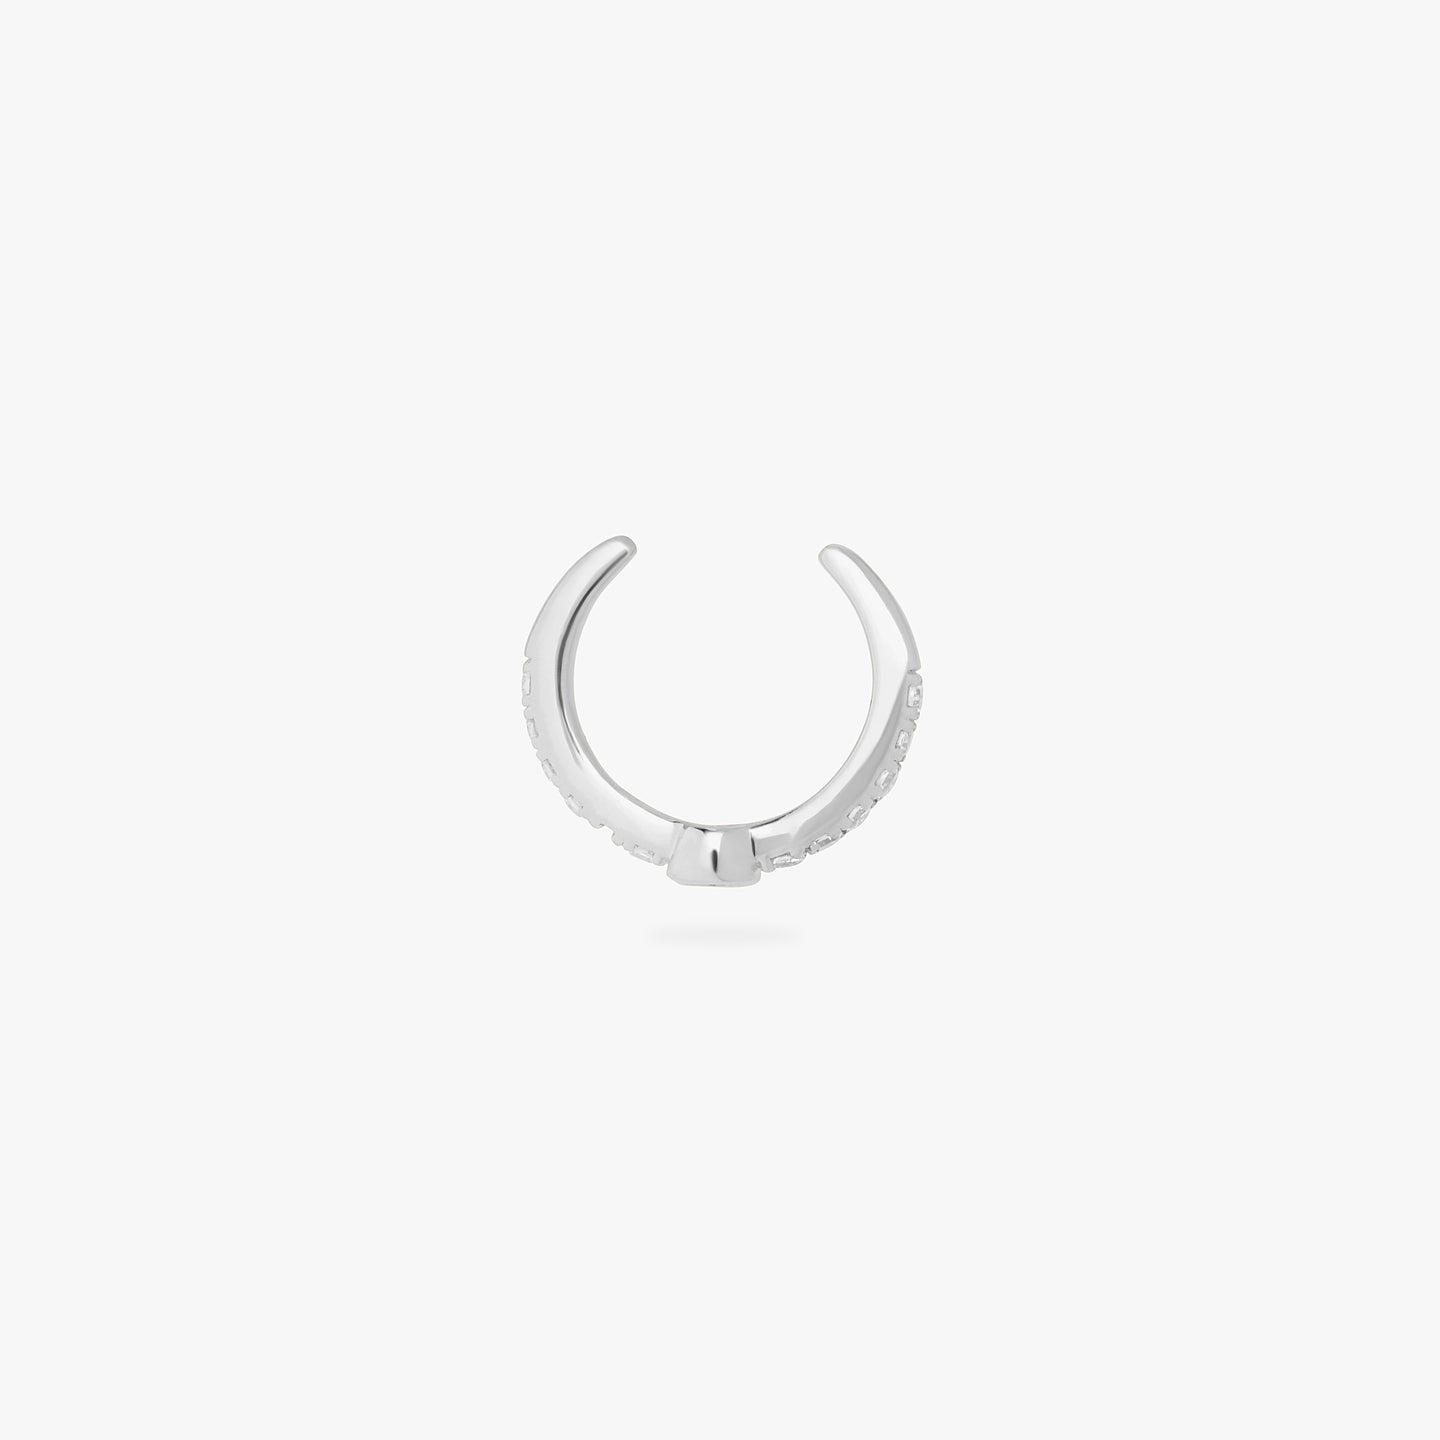 a silver/clear pave slim cuff with a bezel set clear cz stone that a second cz stone dangles from. color:null|silver/clear